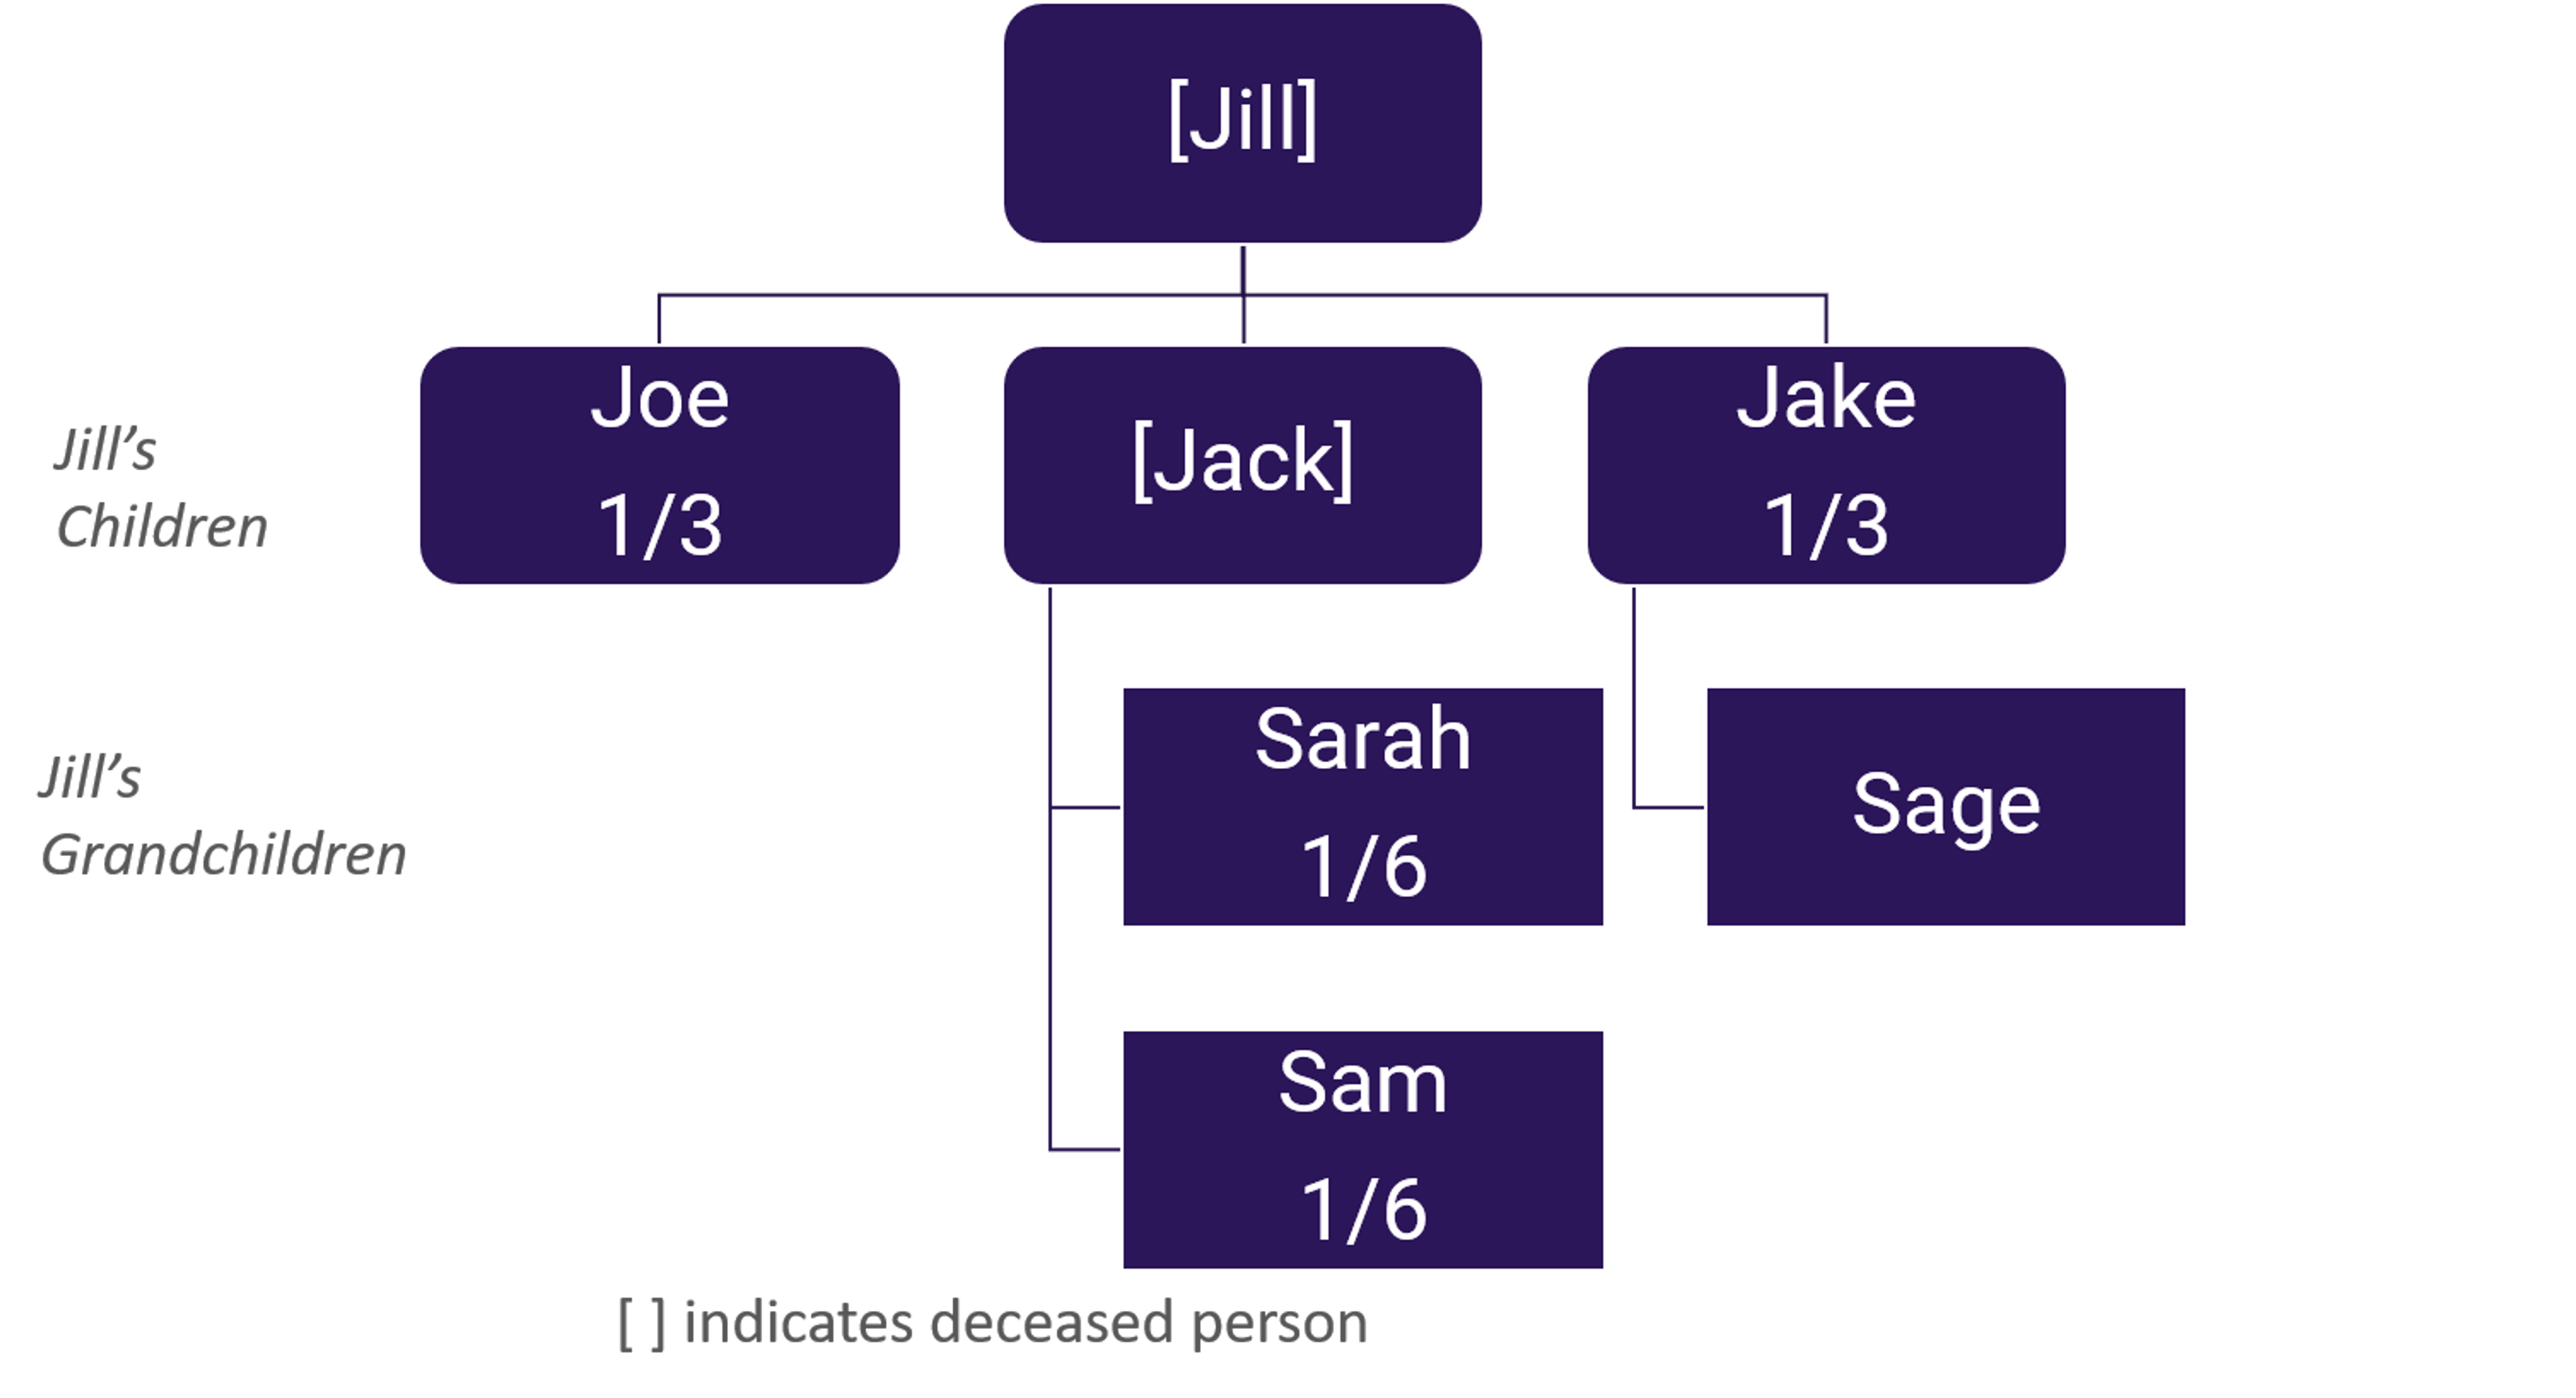 Diagram showing Jack's share evenly split between his two children. Jake and Joe each inherit their same 1/3 share